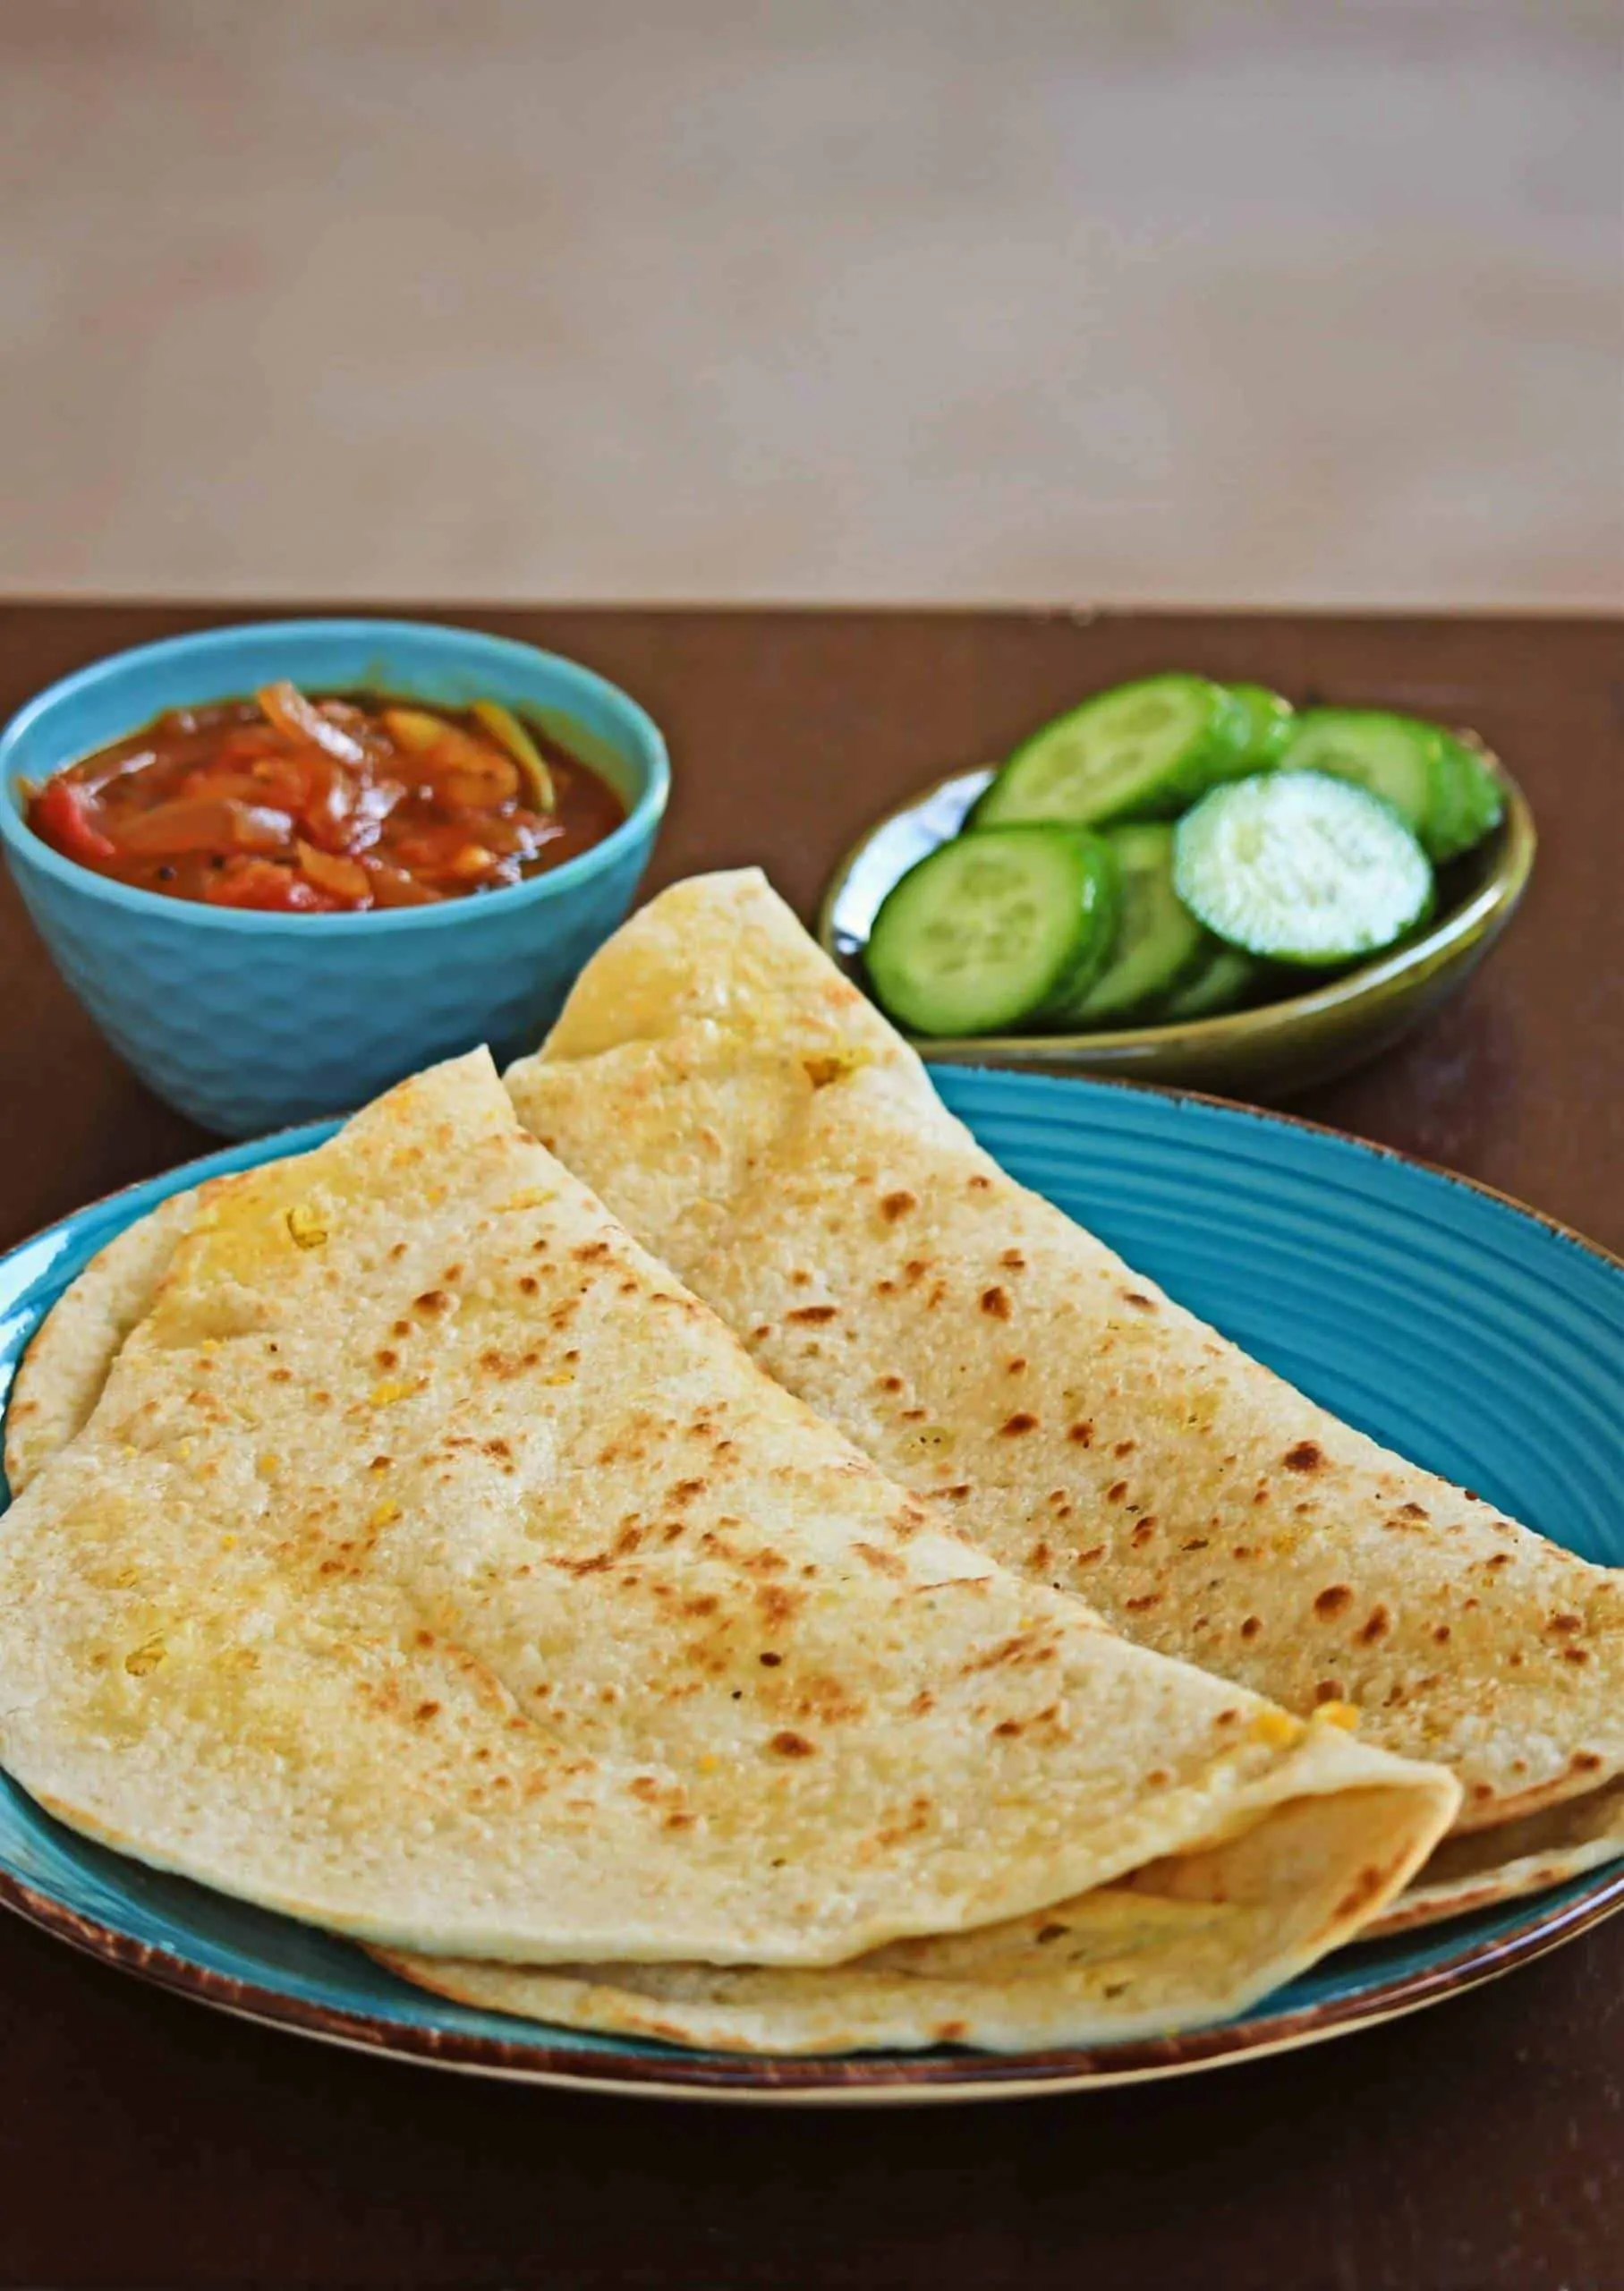 Dhal Puri in a blue plate with sides